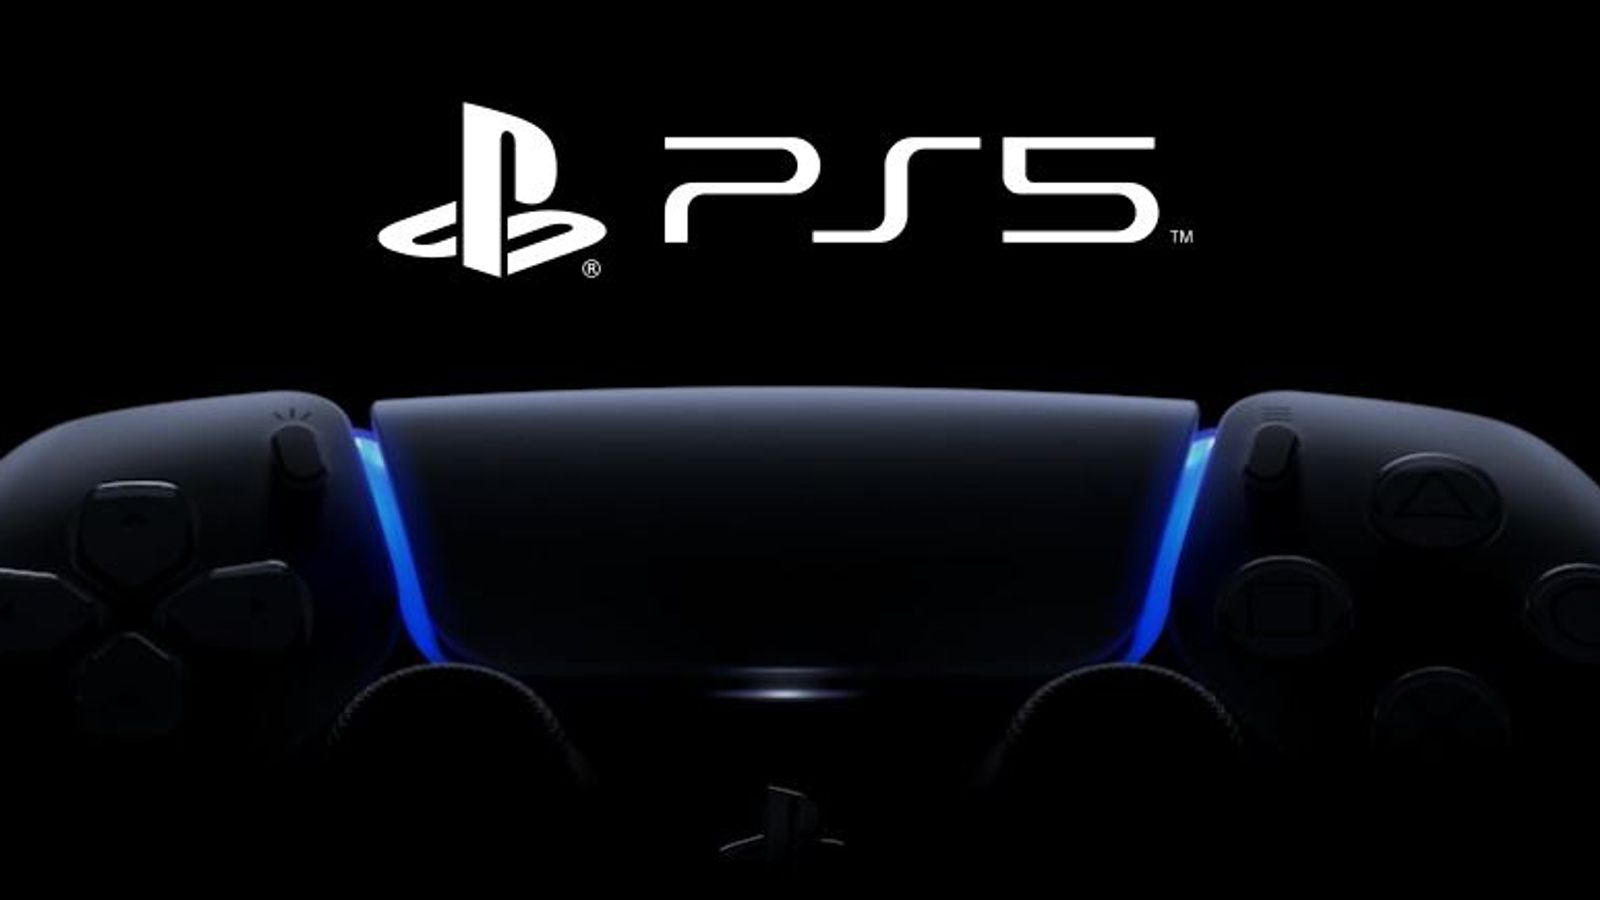 news on the playstation 5